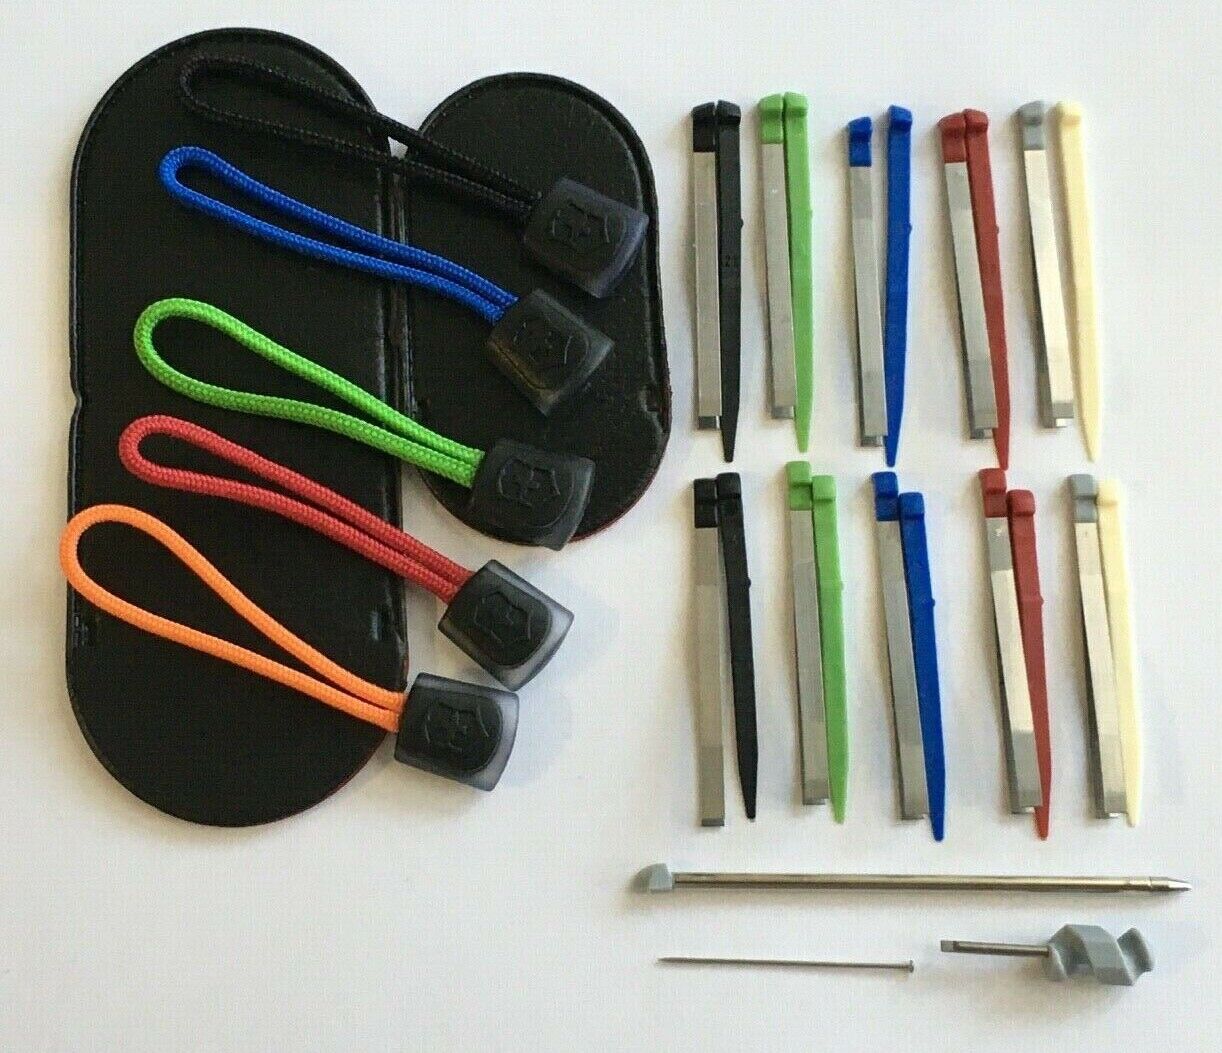 Victorinox SWISS ARMY KNIFE Accessories Replacement Part all colors